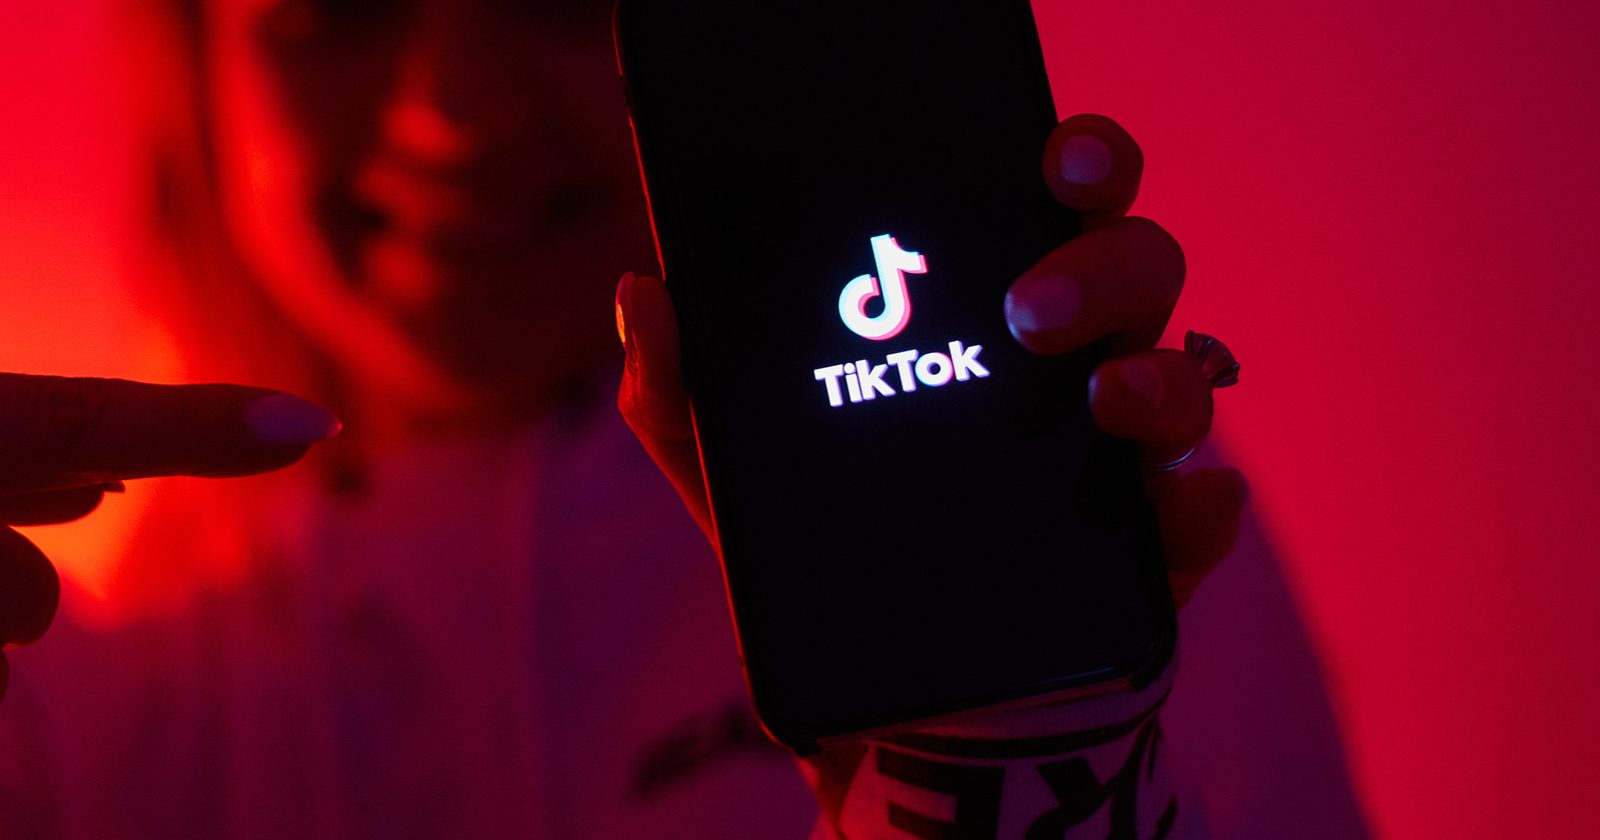 FREE TIKTOK FOLLOWERS GENERATOR NEW METHOD 2022 FOR IOS AND ANDROID